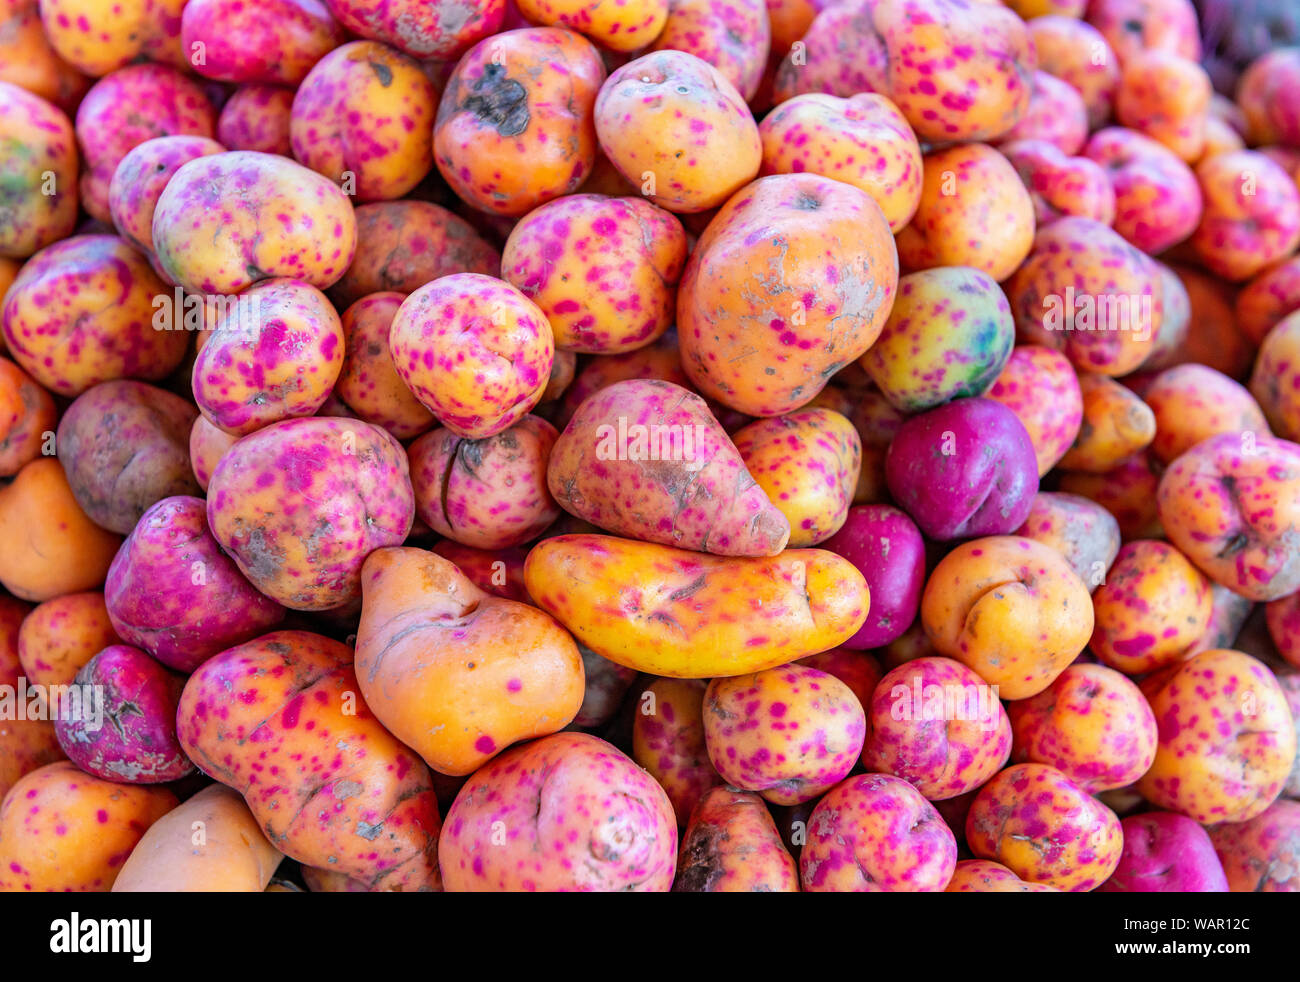 Olluco (Ullucus tuberosus) papa lisa or melloco is a tuber from the Andes mountains in Ecuador, Peru and Bolivia. Local vegetable market, Cusco, Peru. Stock Photo